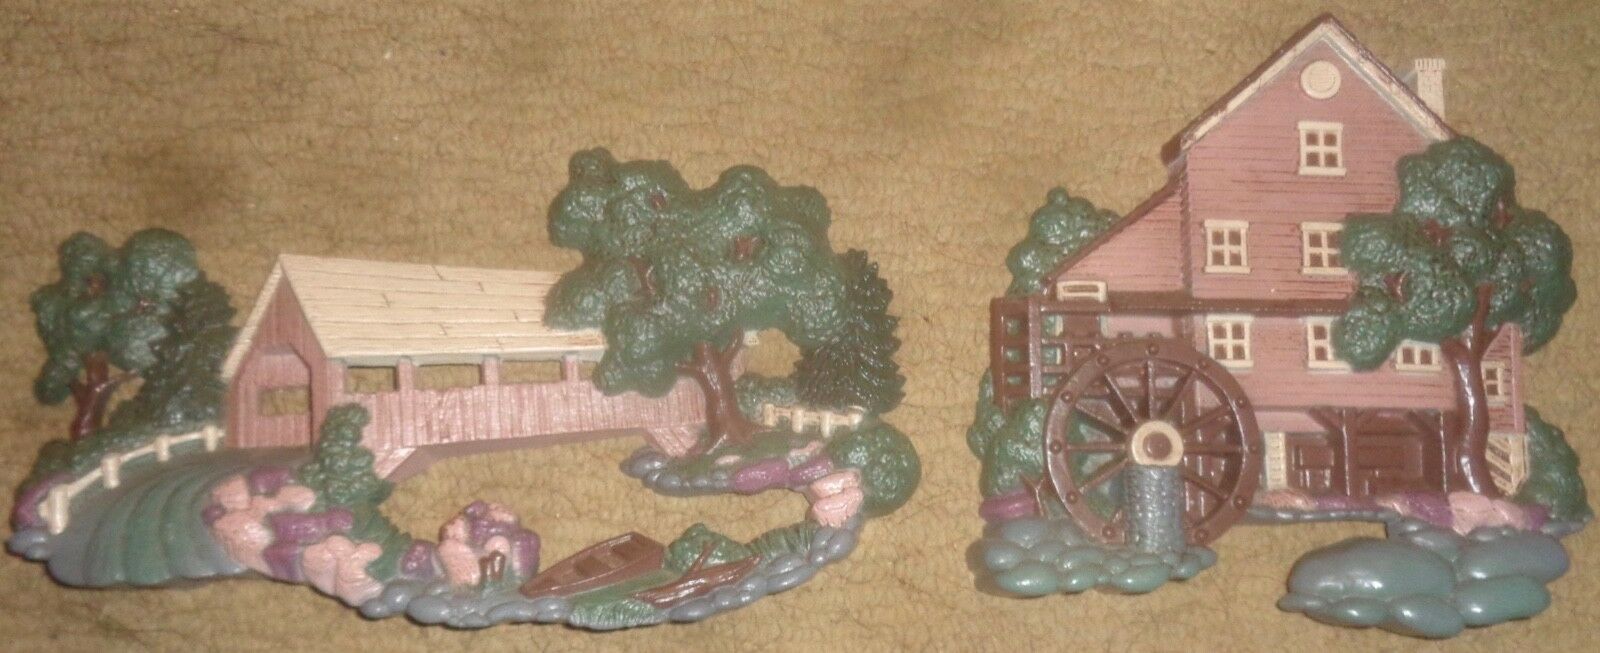 2 Vintage 1998 Home Interiors Water Wheel Covered Bridge Wall Plaques #3276